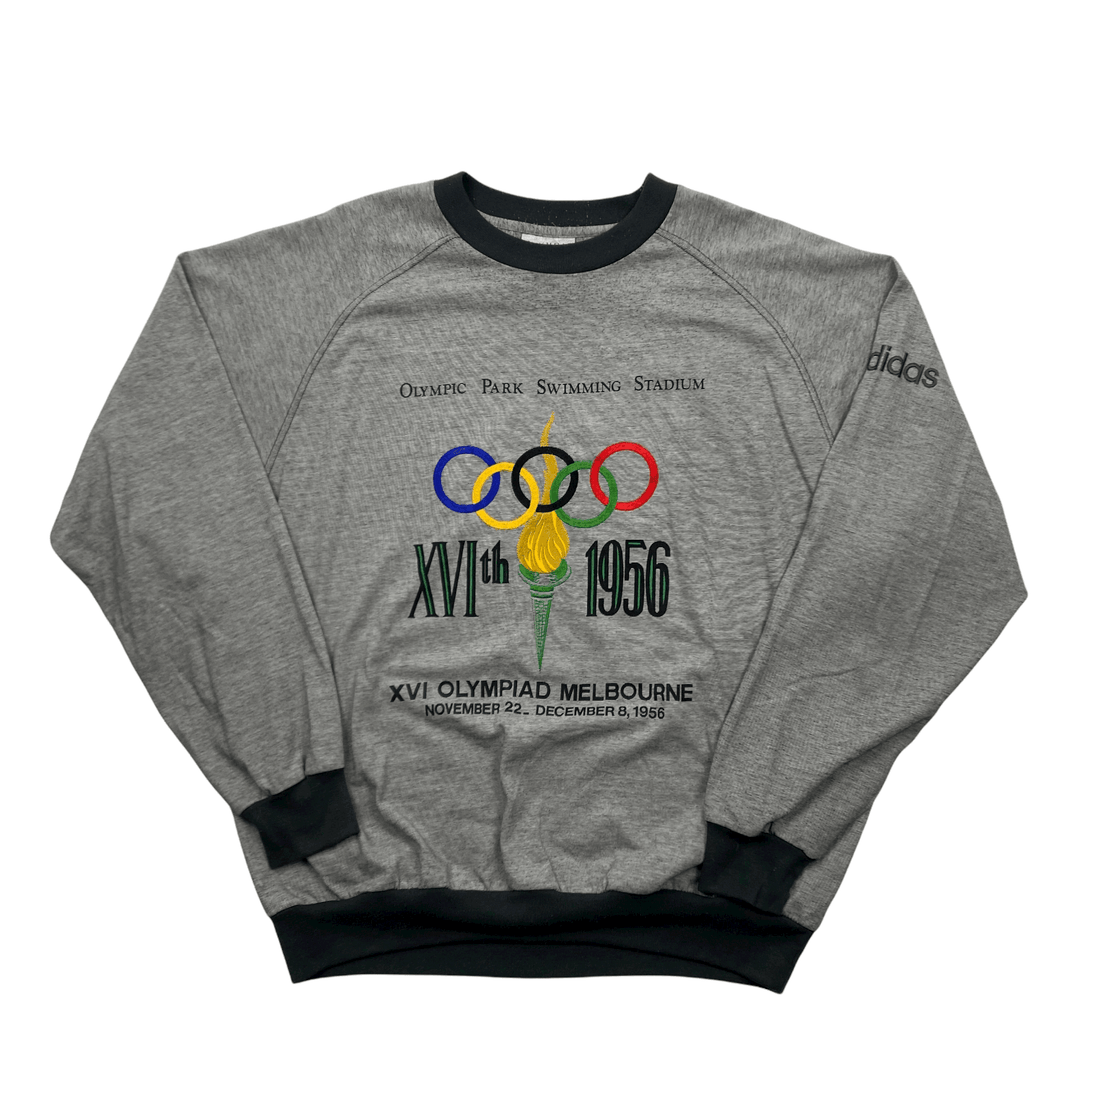 Vintage 90s Grey Adidas Olympic Collection Spell-Out Sweatshirt - Large - The Streetwear Studio